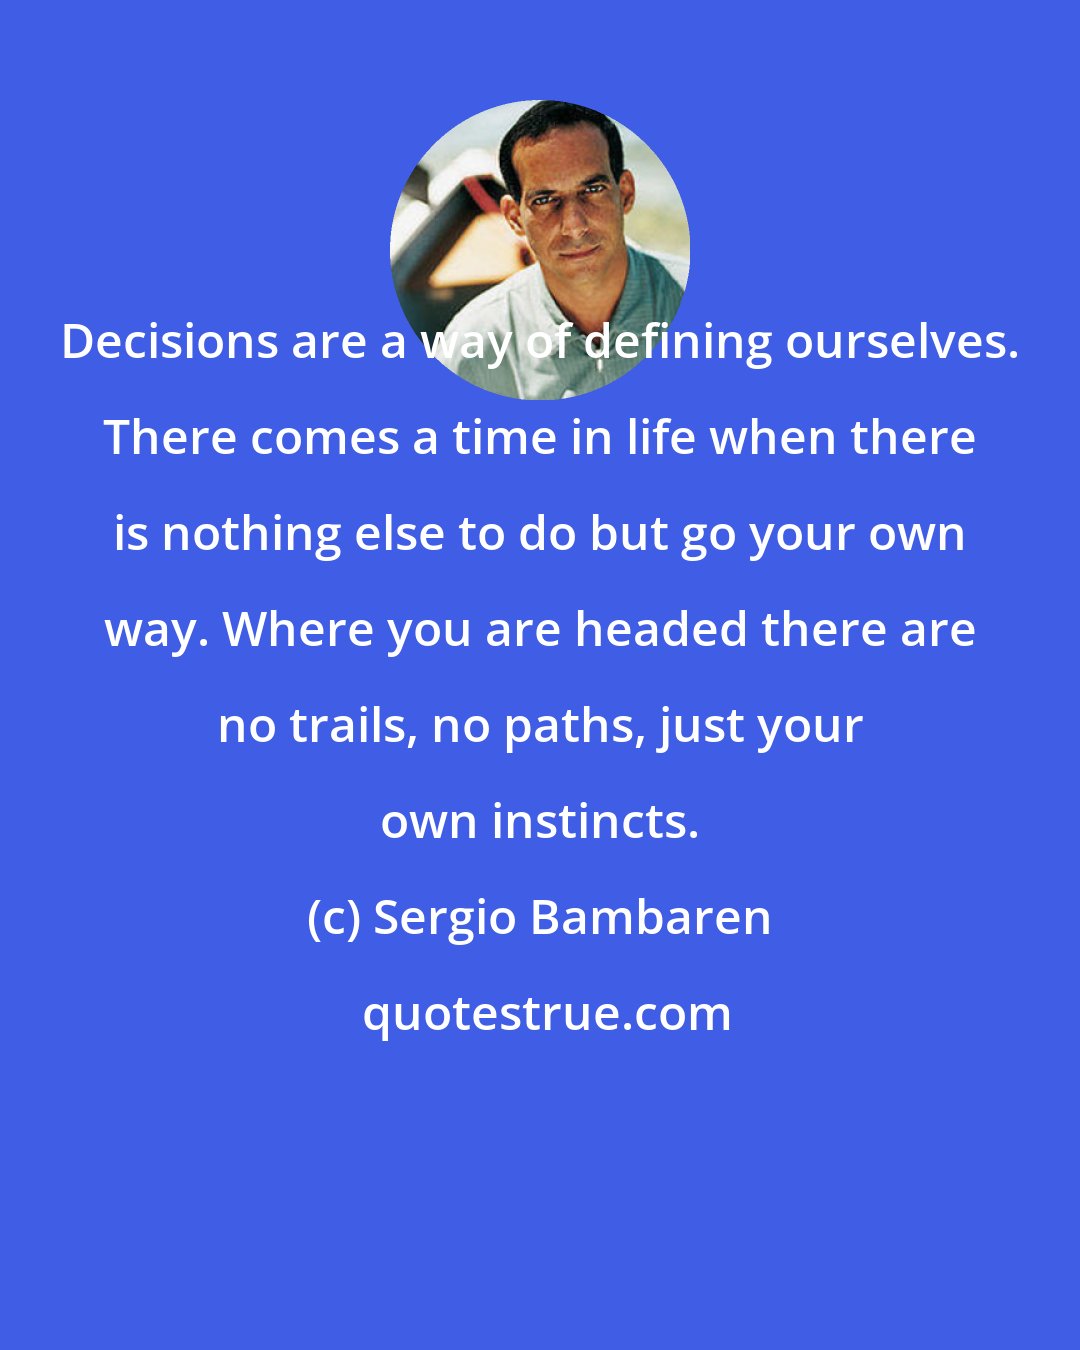 Sergio Bambaren: Decisions are a way of defining ourselves. There comes a time in life when there is nothing else to do but go your own way. Where you are headed there are no trails, no paths, just your own instincts.